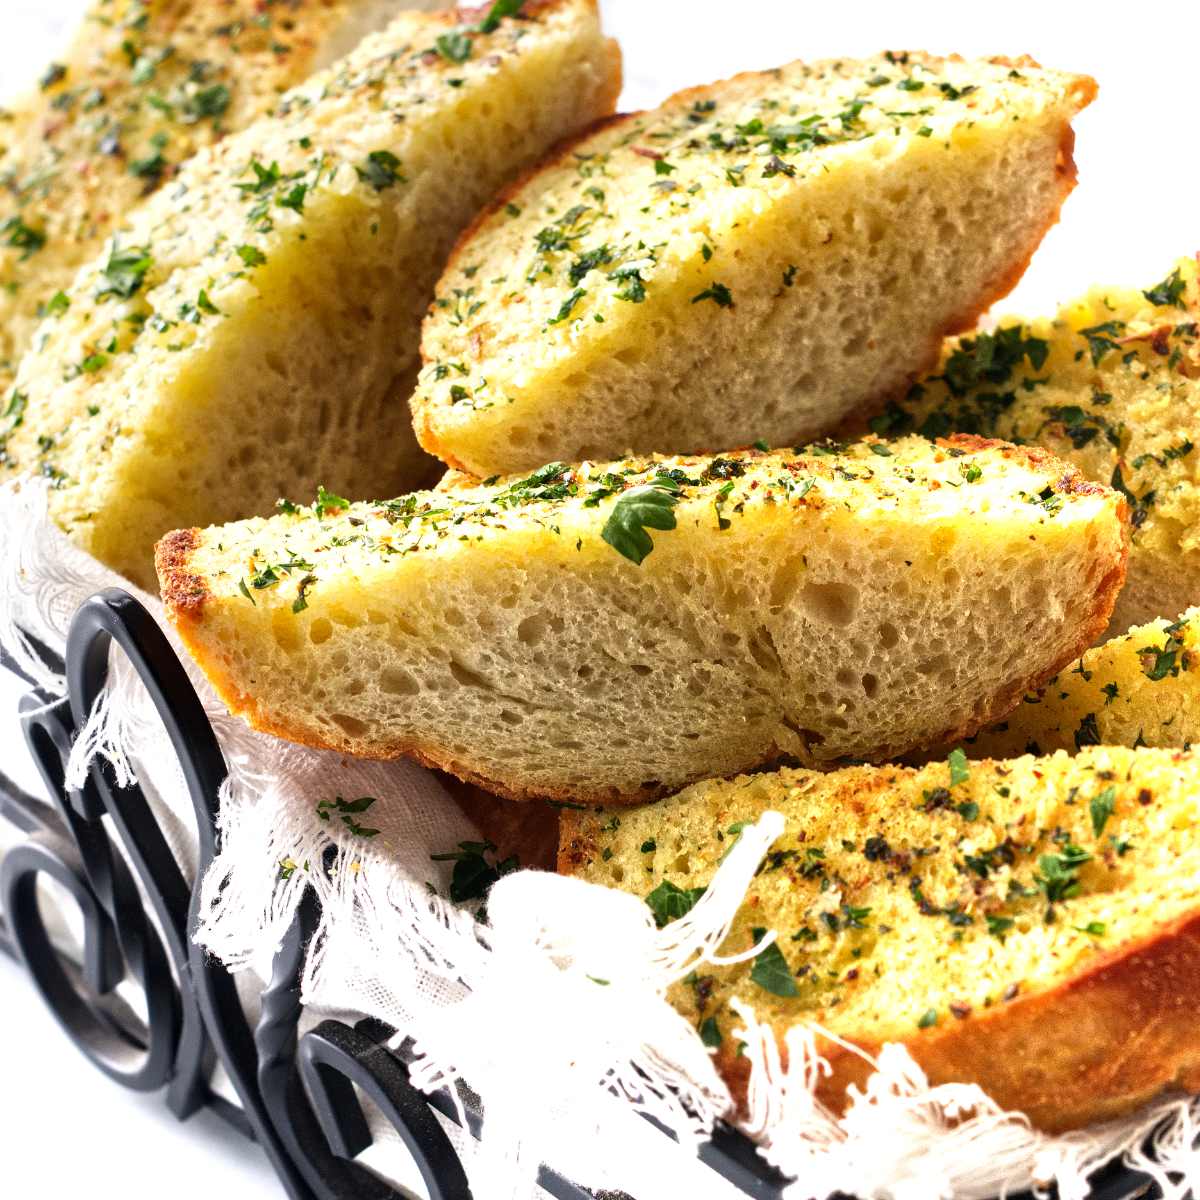 Buttery slices of bread in a black wroght iron bread basket.